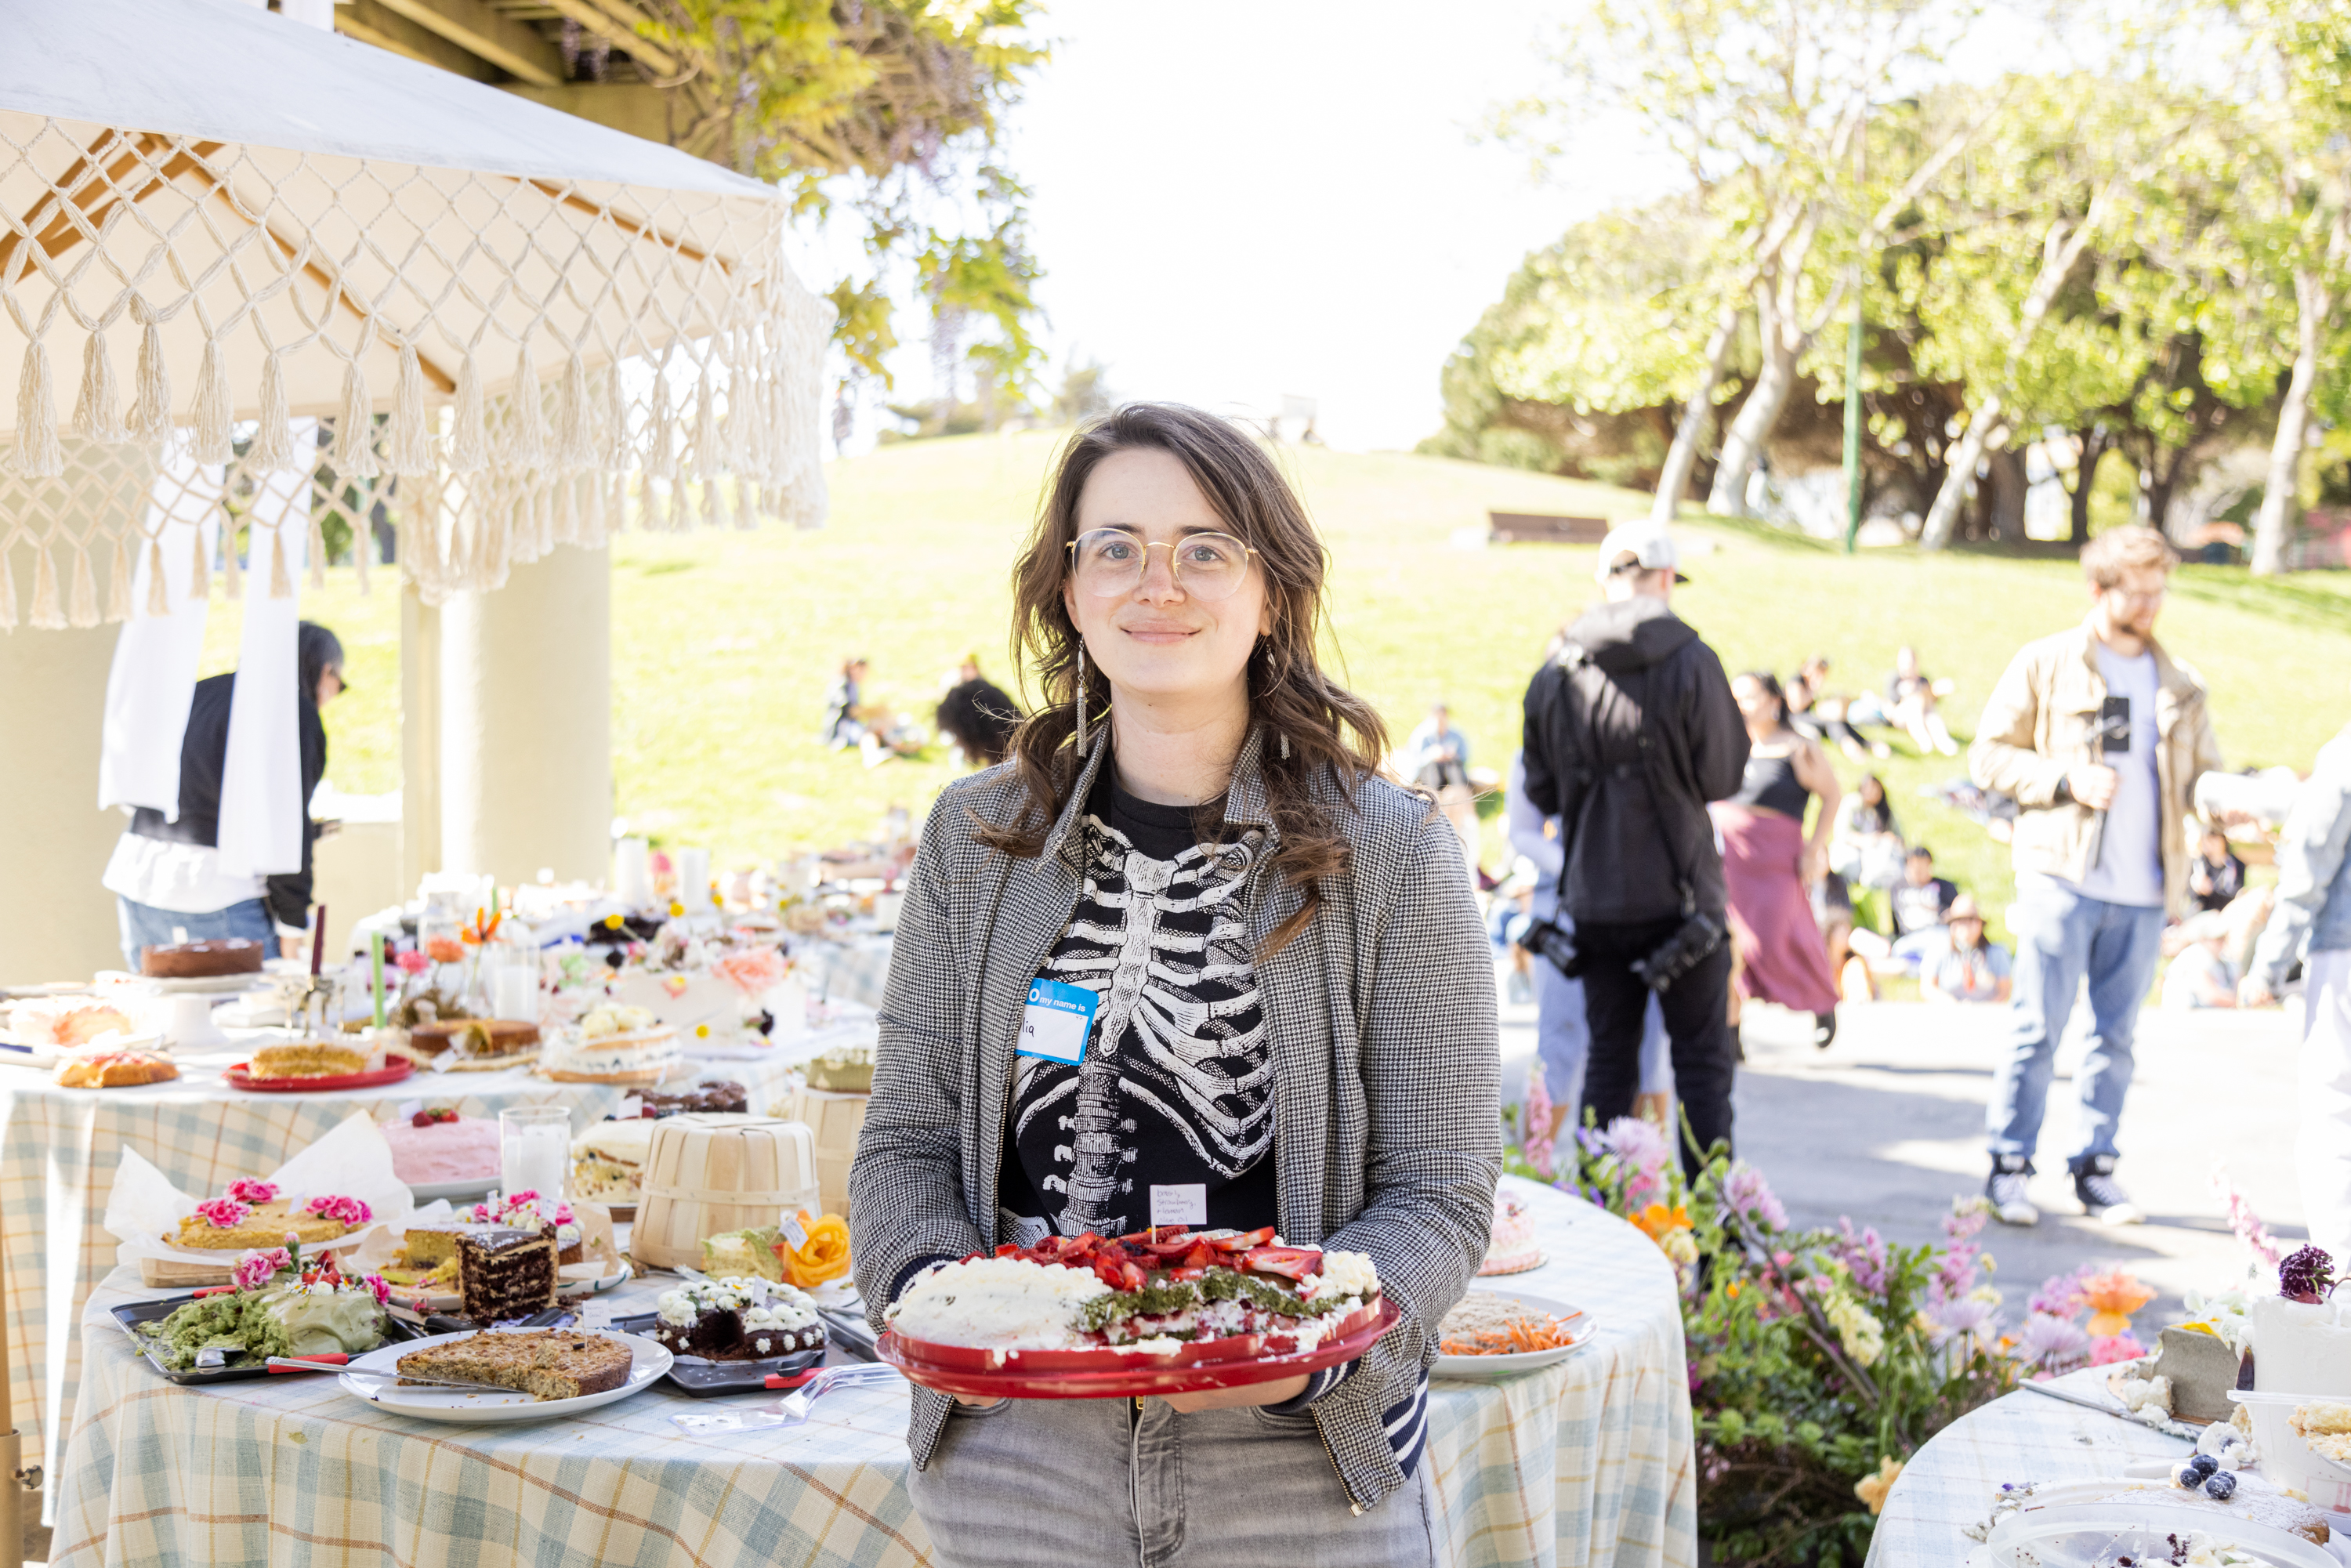 A woman holding a dish stands in front of a table laden with food at an outdoor event.